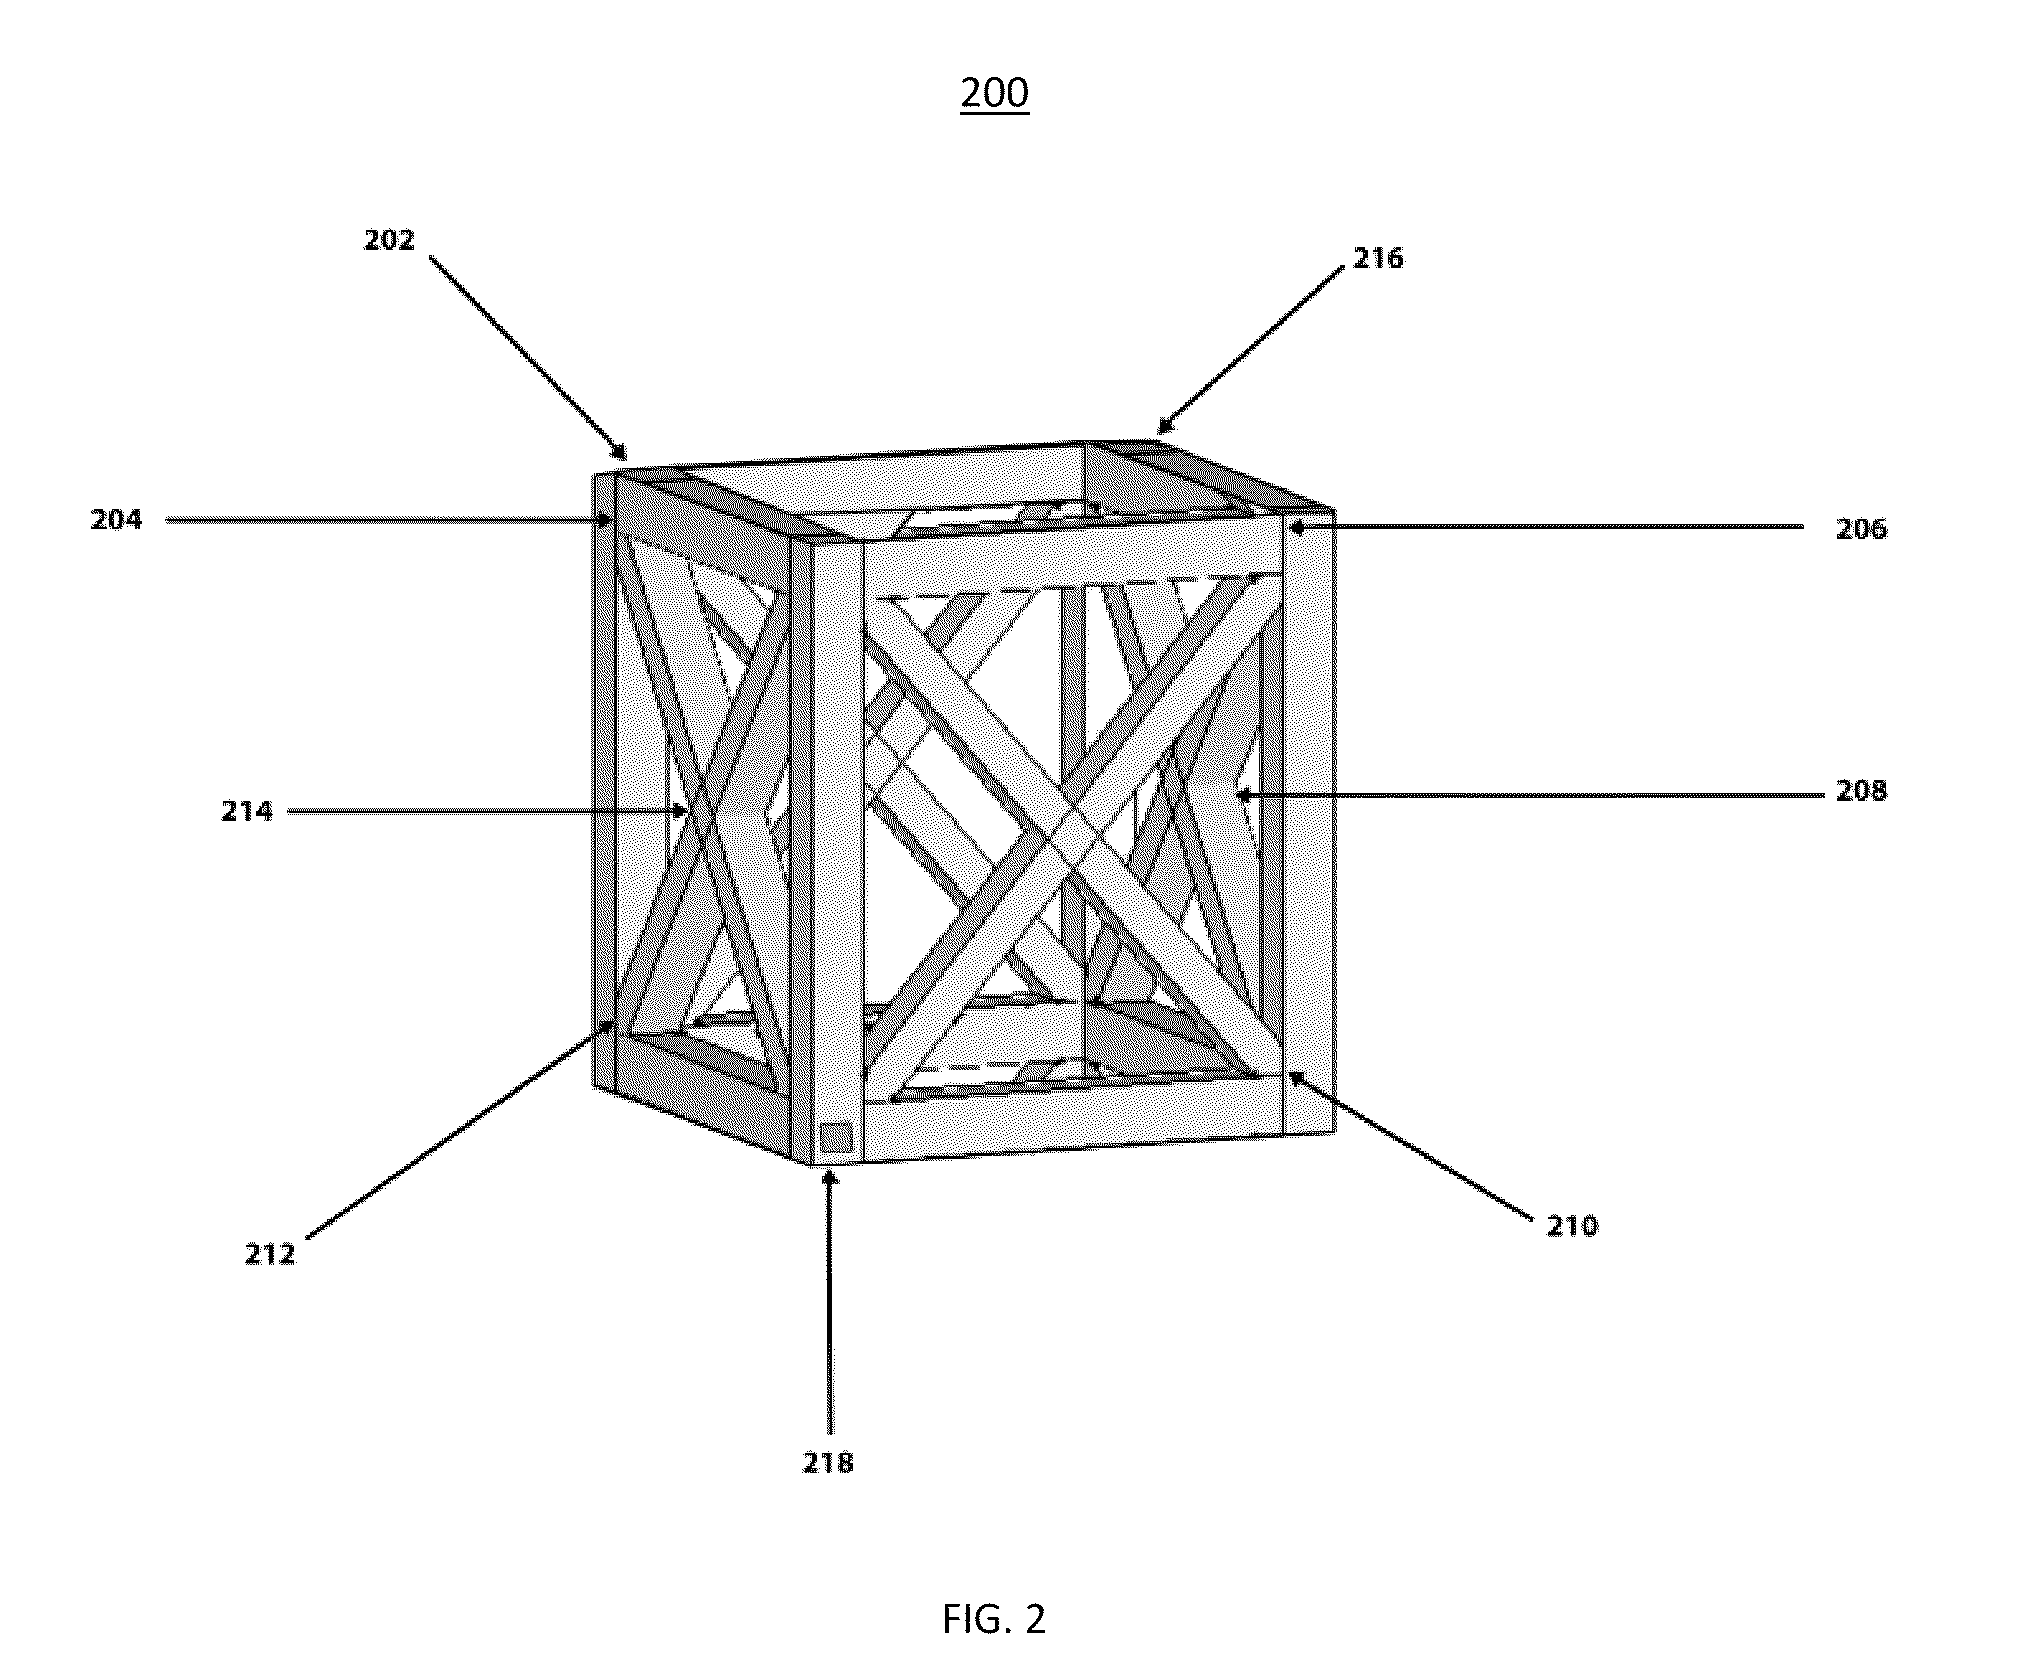 System and method used for configuration of an inspection compliance tool with machine readable tags and their associations to inspected components